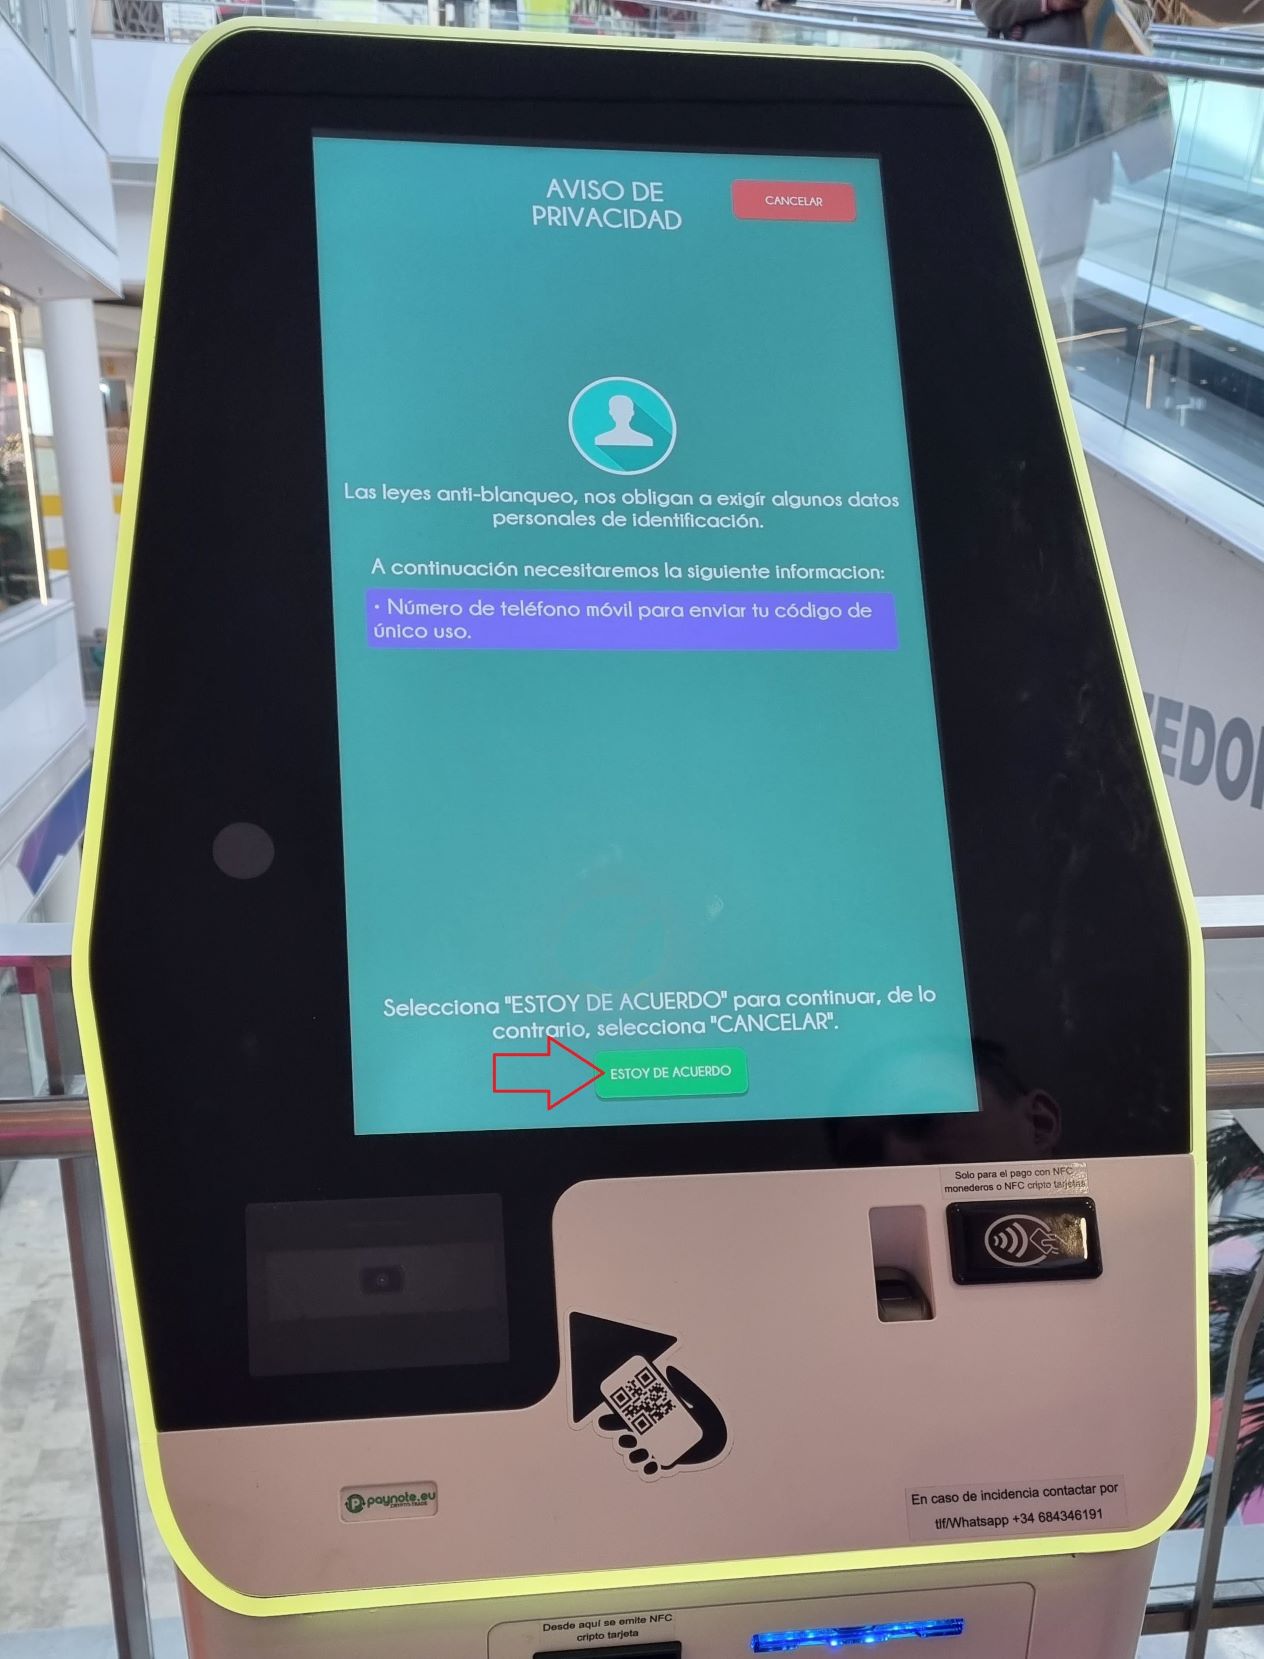 accept terms at crypto ATM